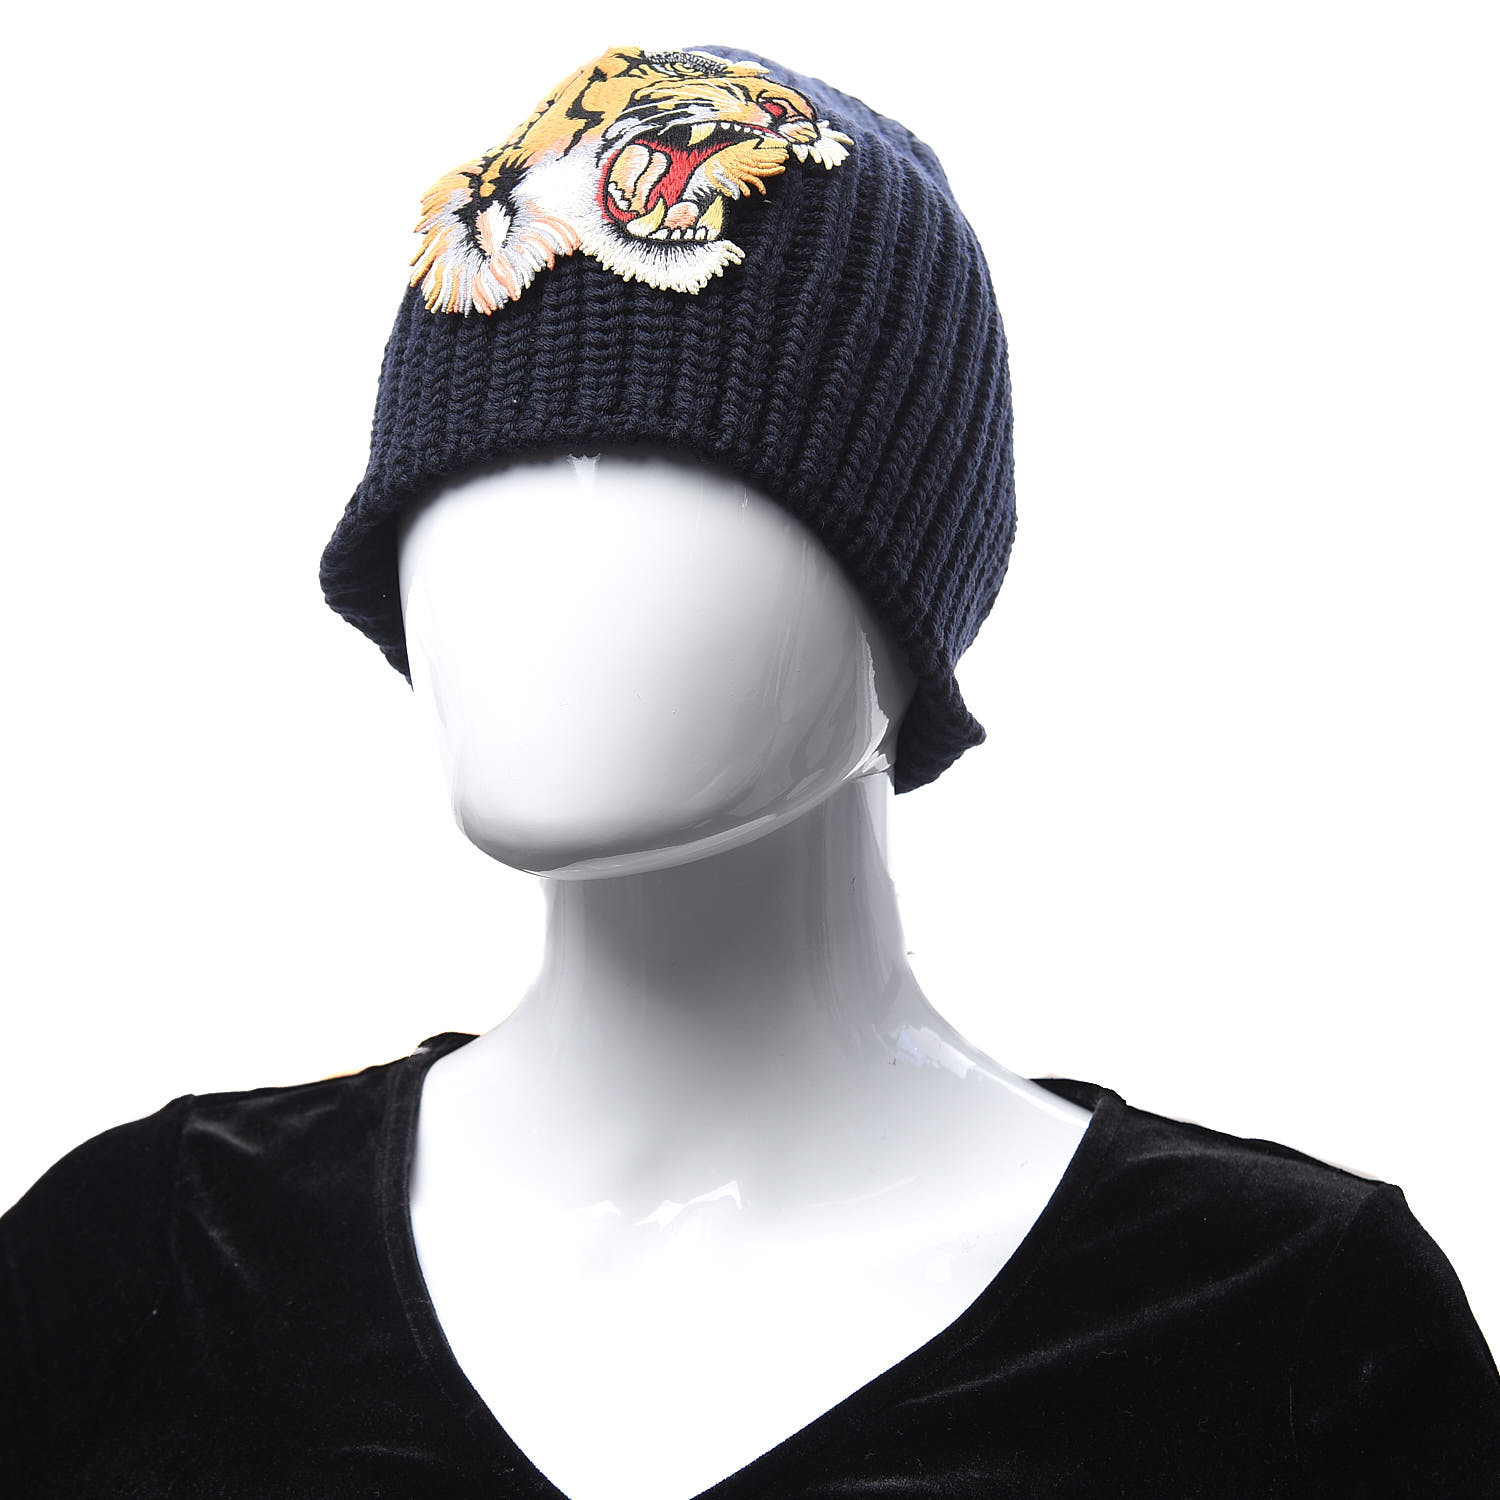 Wool Embroidered Tiger Knit Hat Black 452633 | FASHIONPHILE